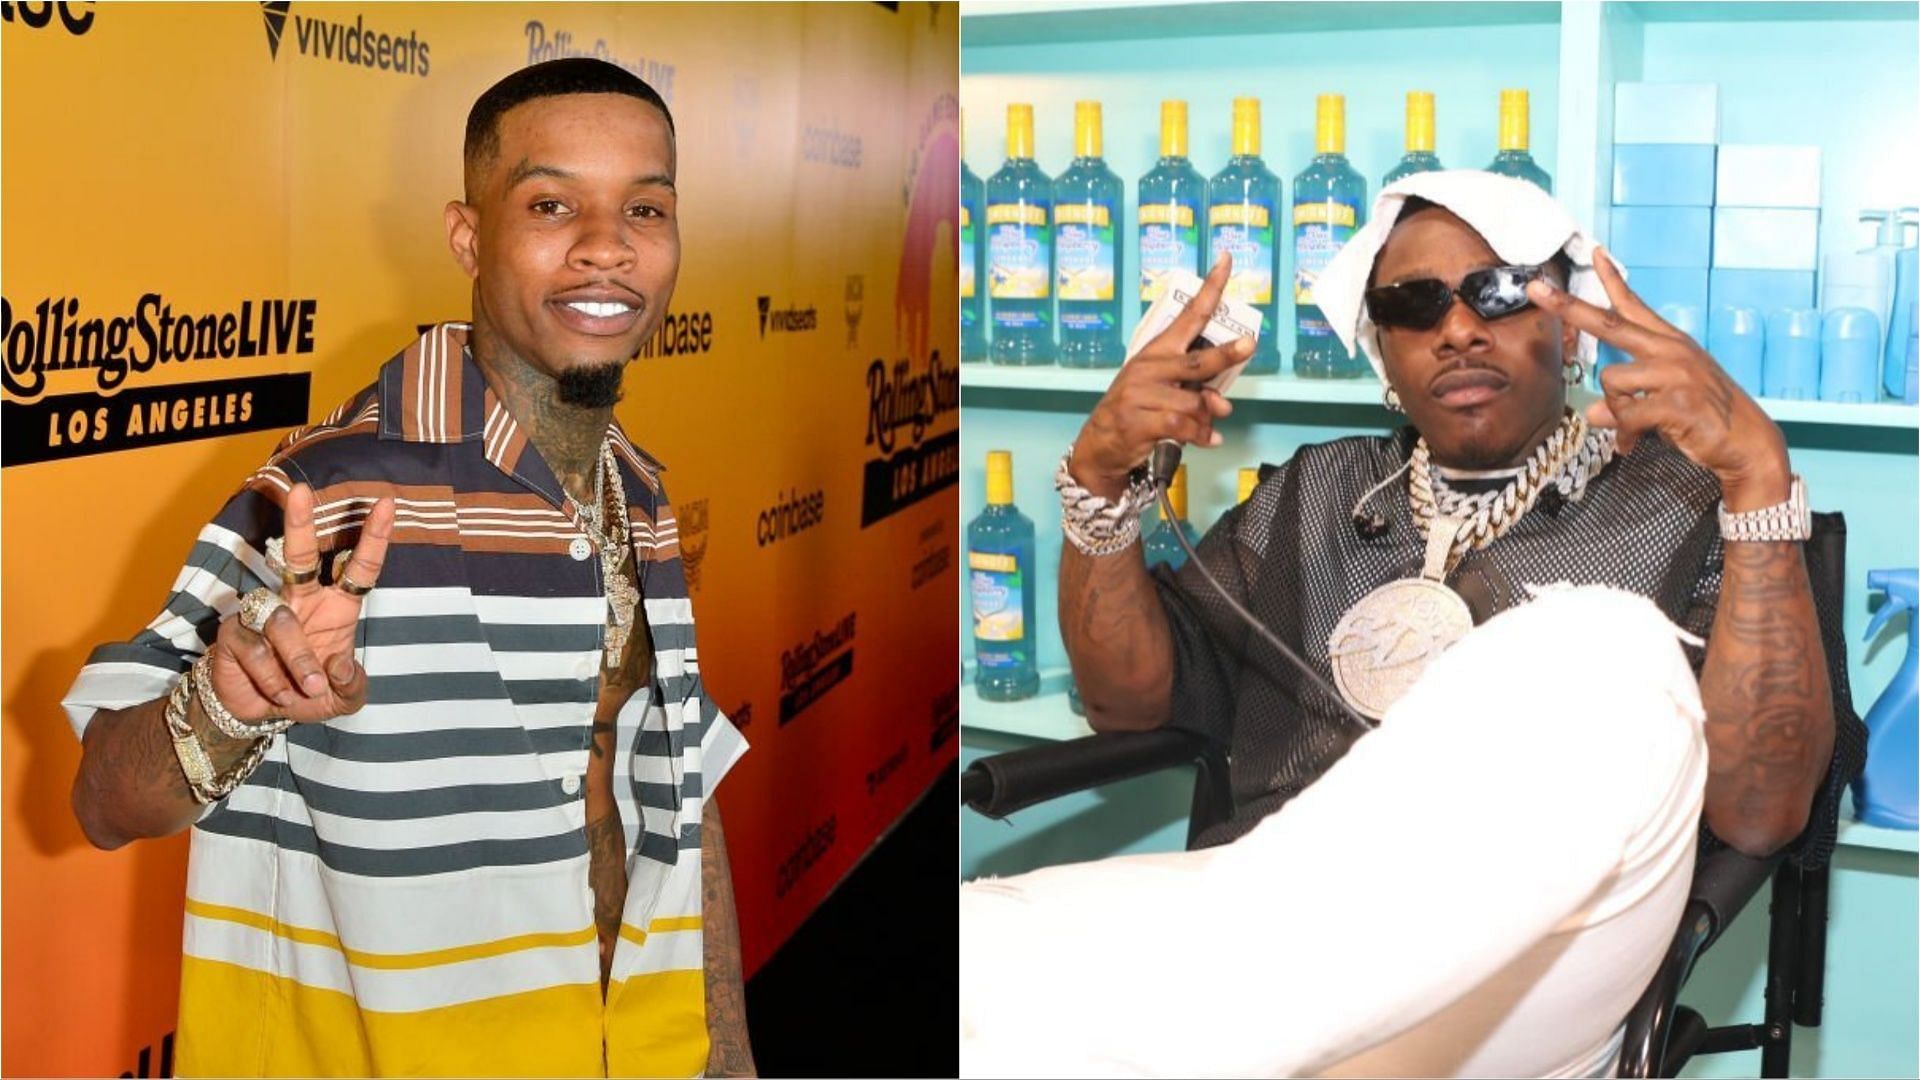 Court documents revealed that Tory Lanez and DaBaby attacked Megan Thee Stallion during an event (Images via Jerod Harris and Johnny Nunez/Getty Images)